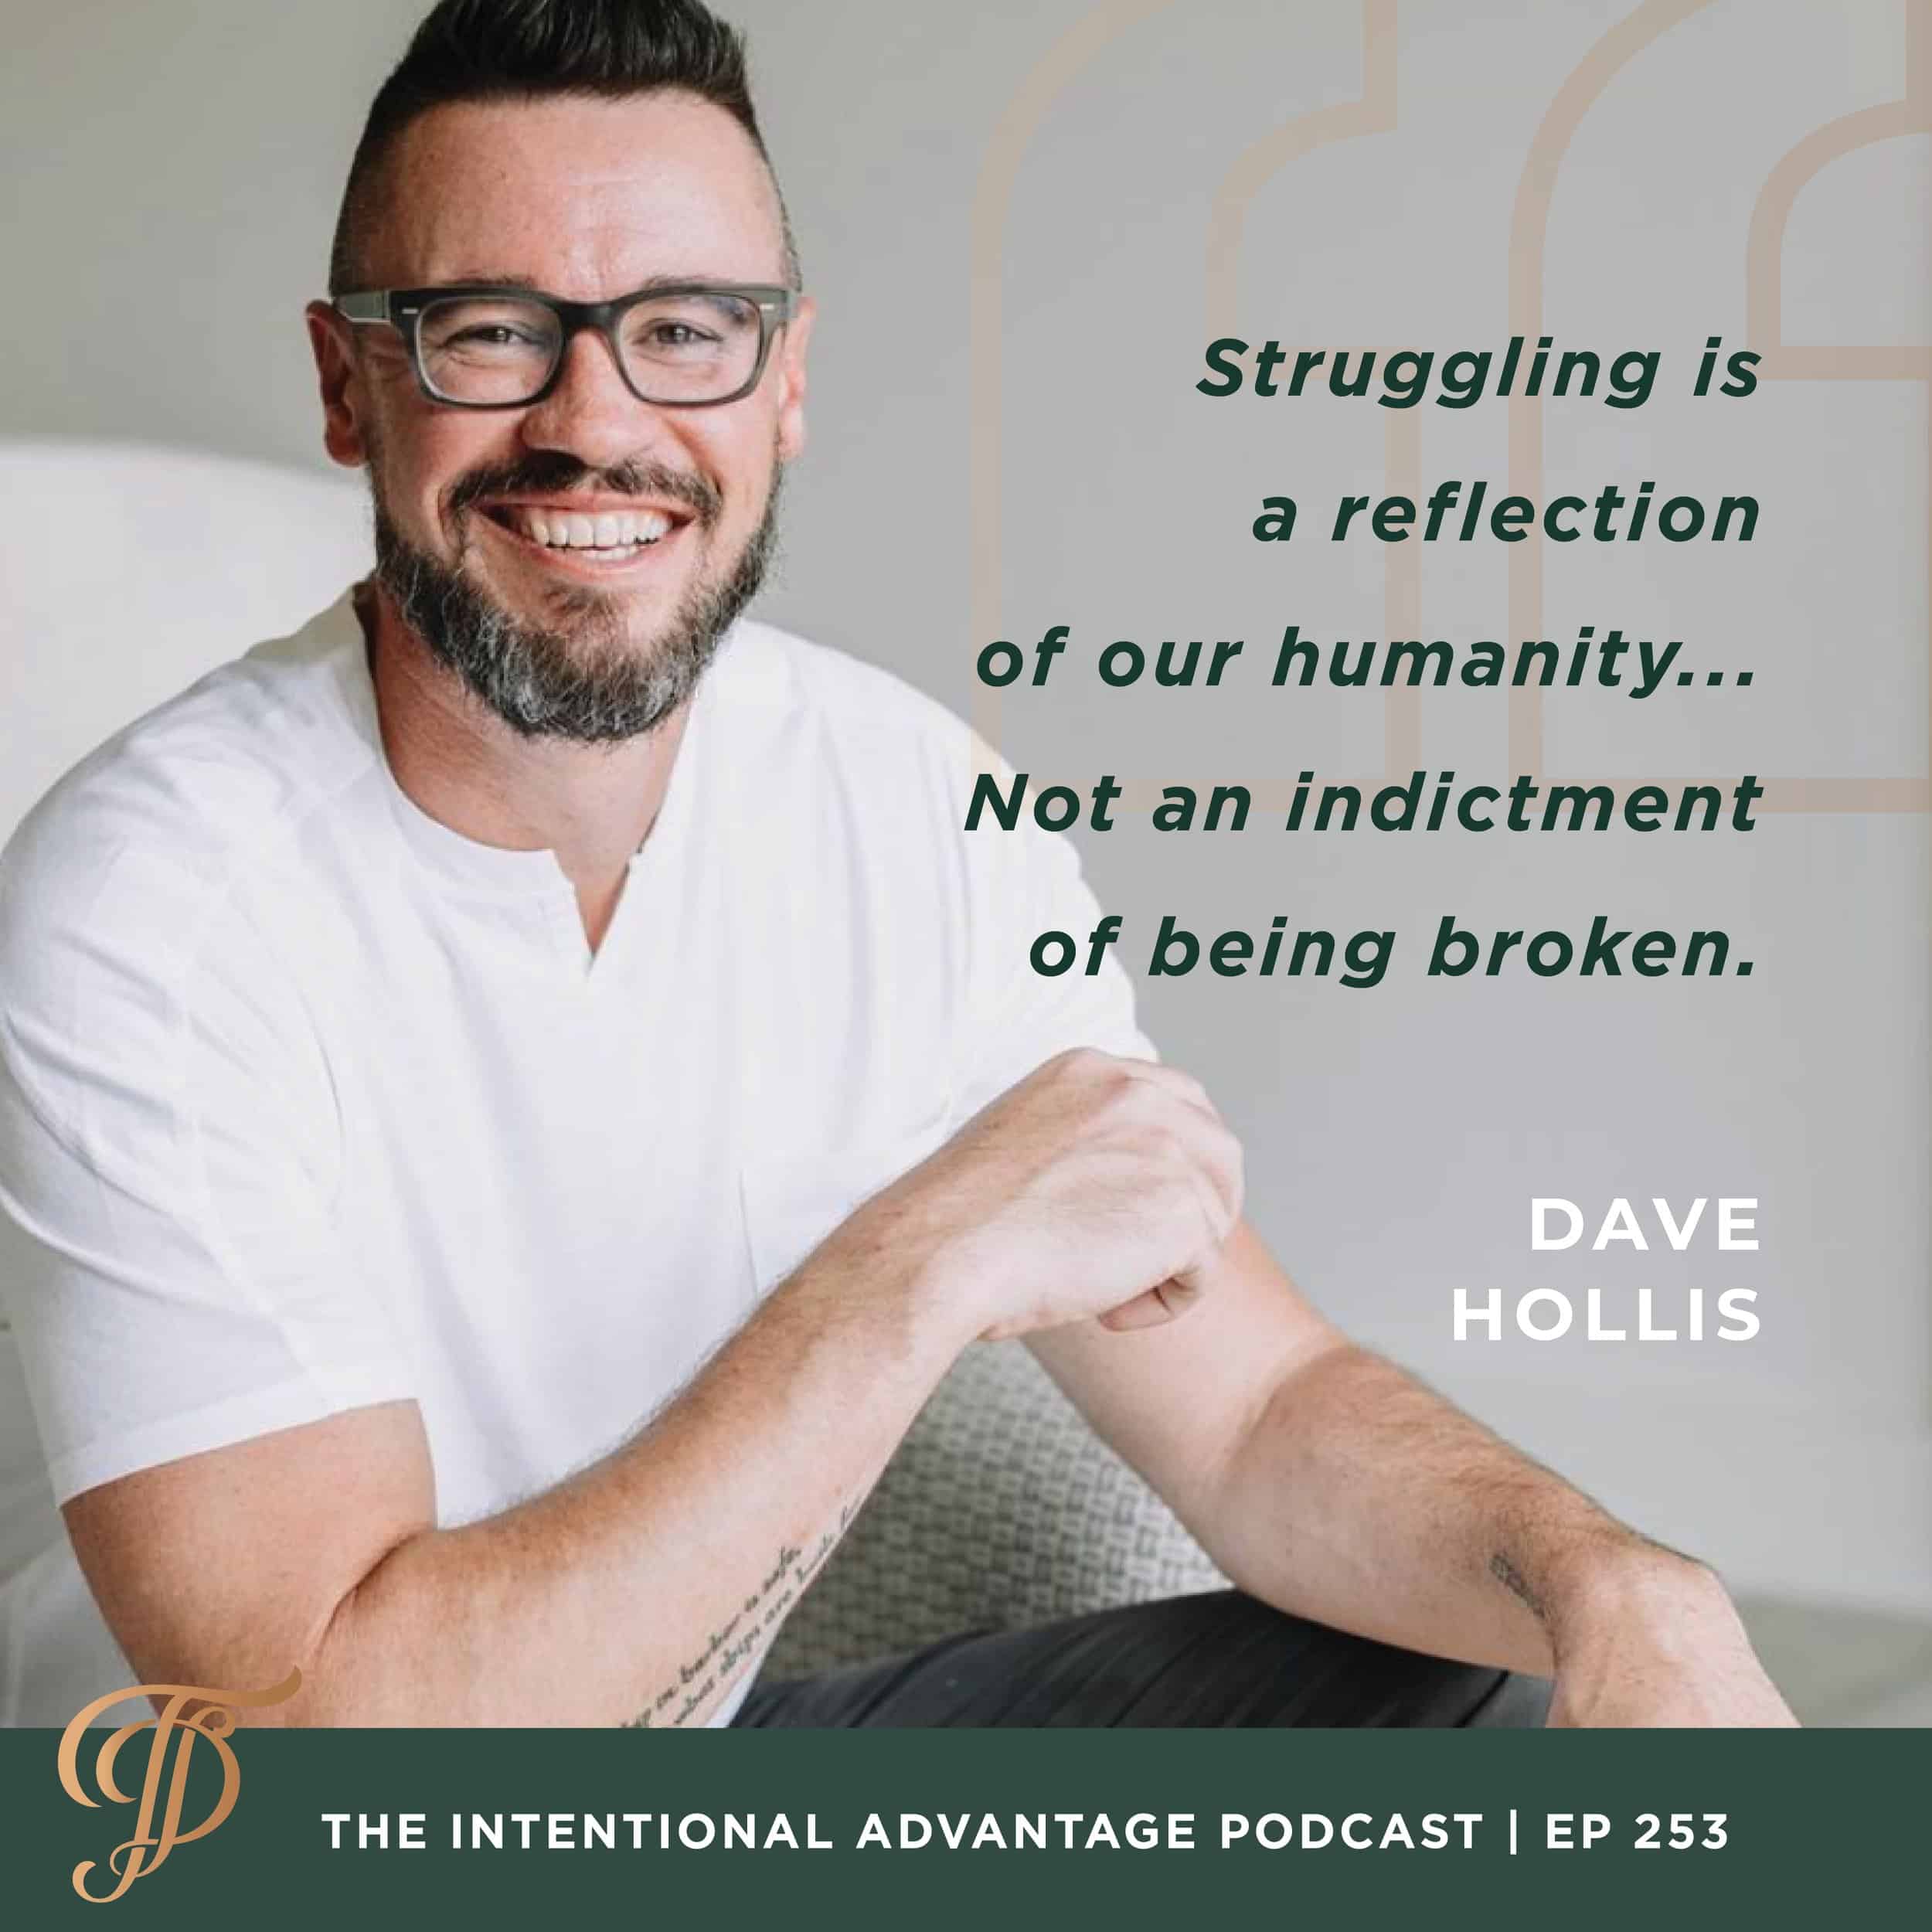 Dave Hollis quote on his podcast interview on The Intentional Advantage